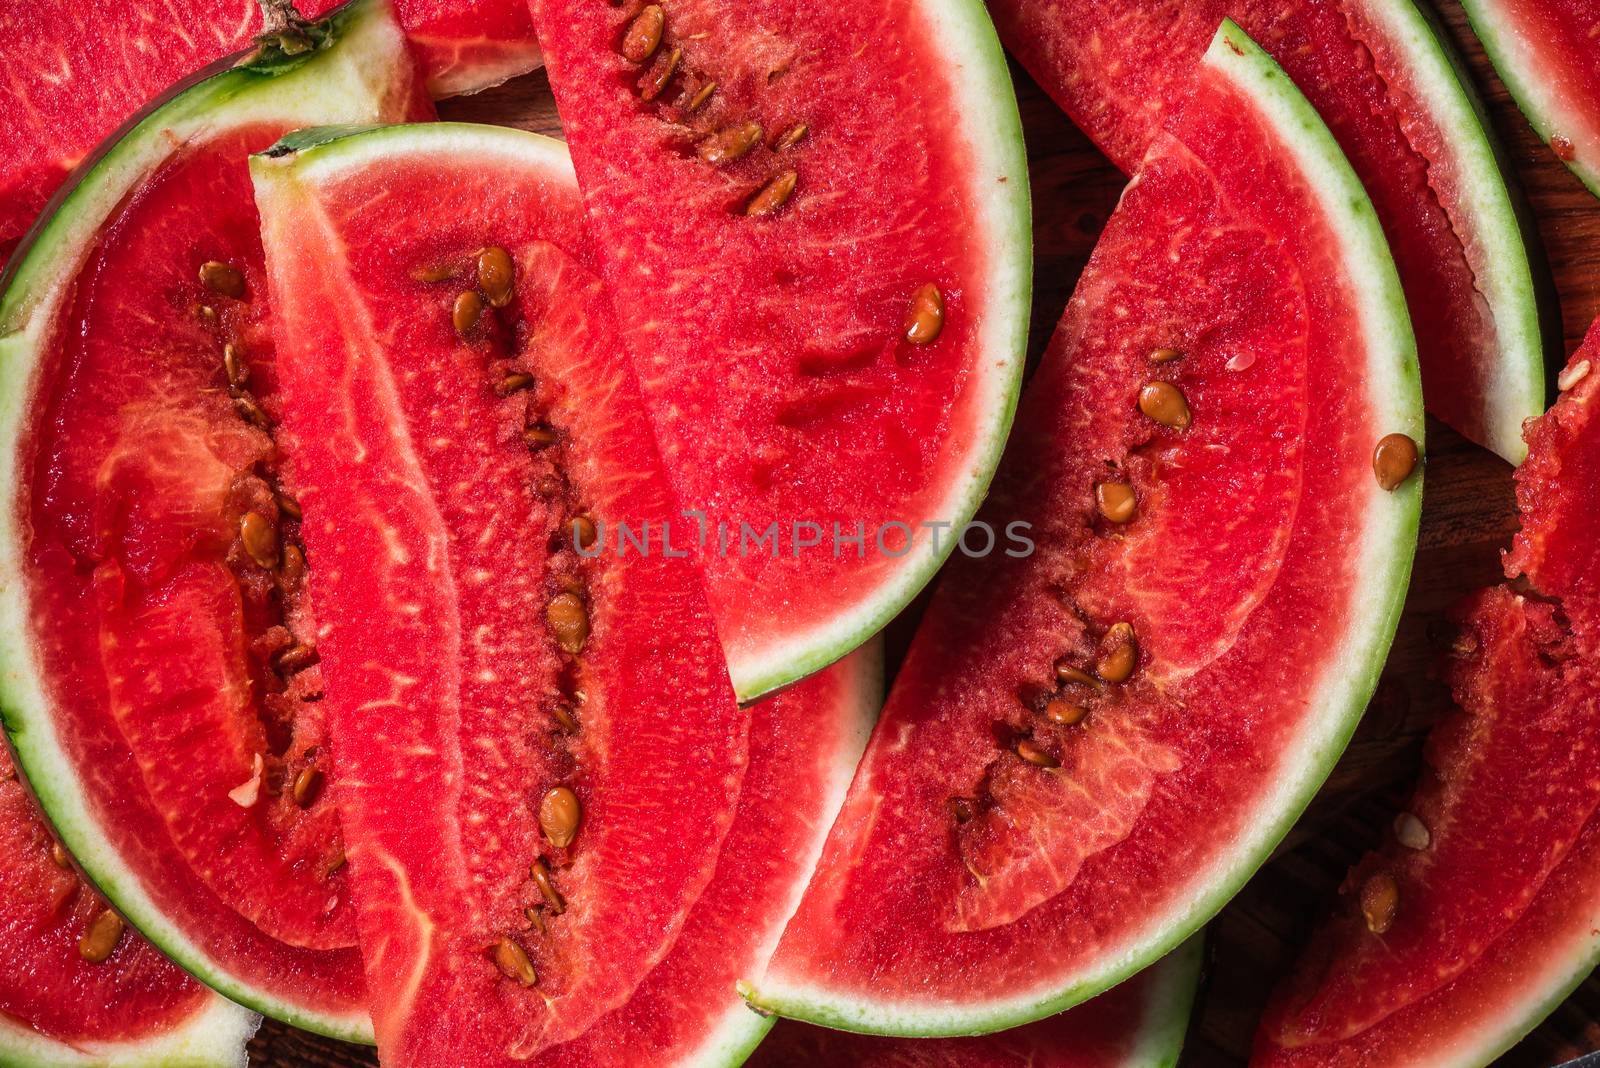 Watermelon slices lying on wooden surface by Seva_blsv